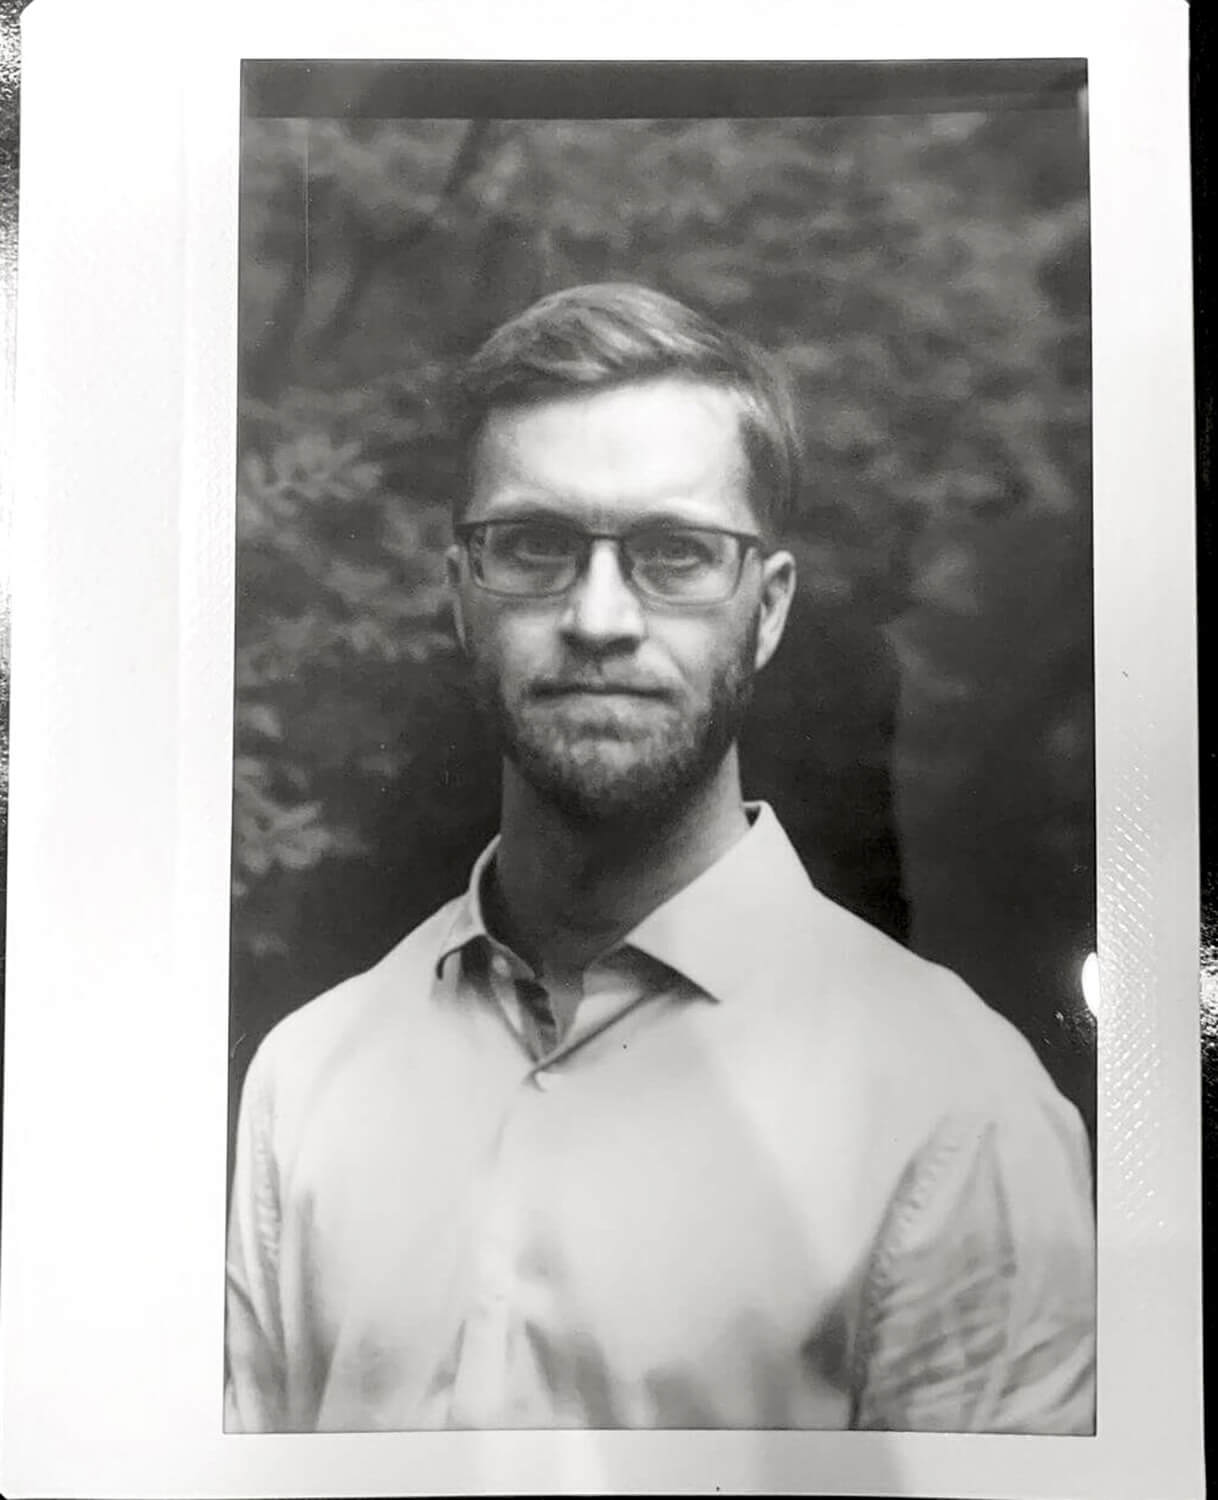 A portrait of my brother-in-law, on instax wide monochrome, exposed in a 4x5 holder using a 3d printed insert